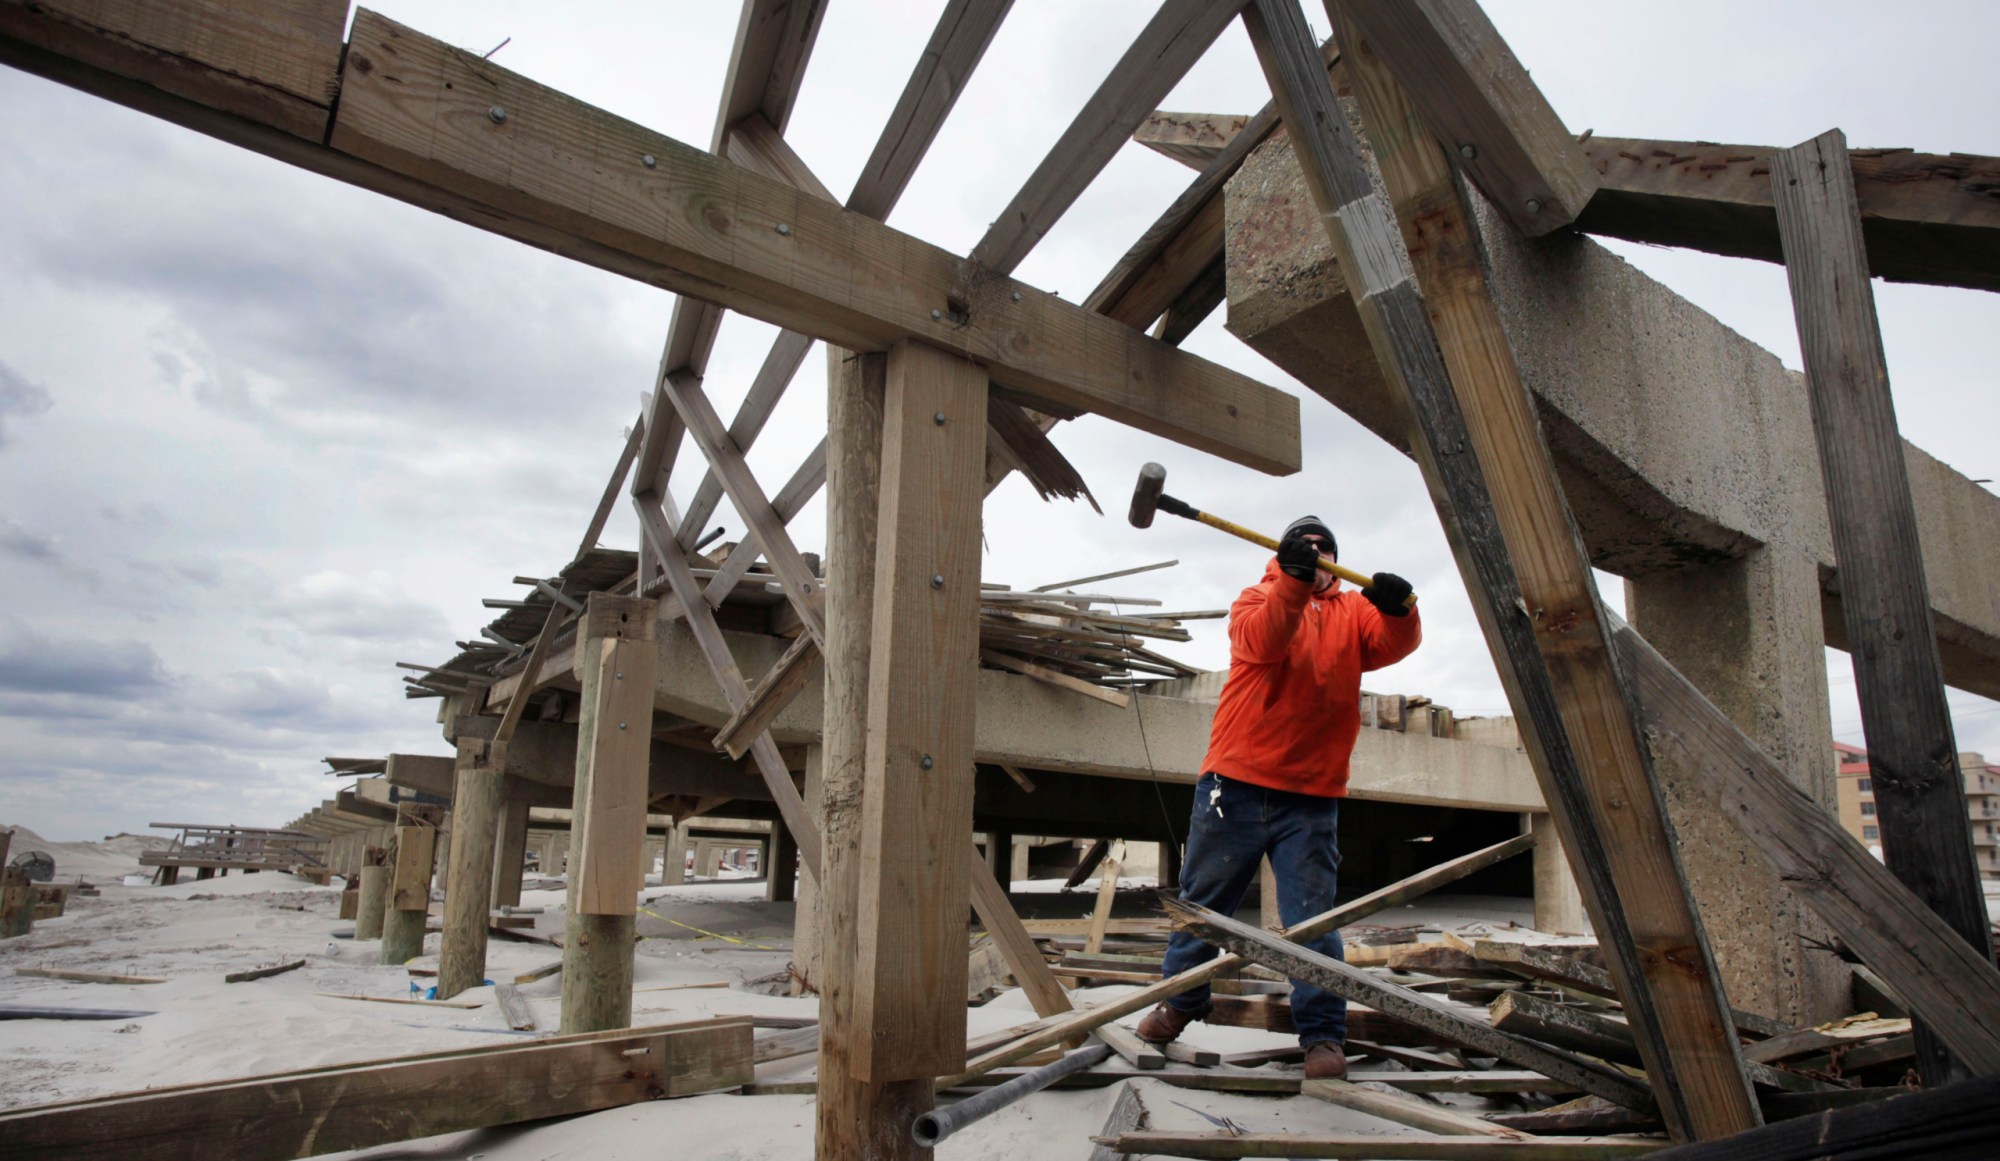 Shawn Polito uses a sledgehammer to knock apart timbers on the Long Beach, New York boardwalk, which was devastated by Superstorm Sandy. (AP/Mark Lennihan)